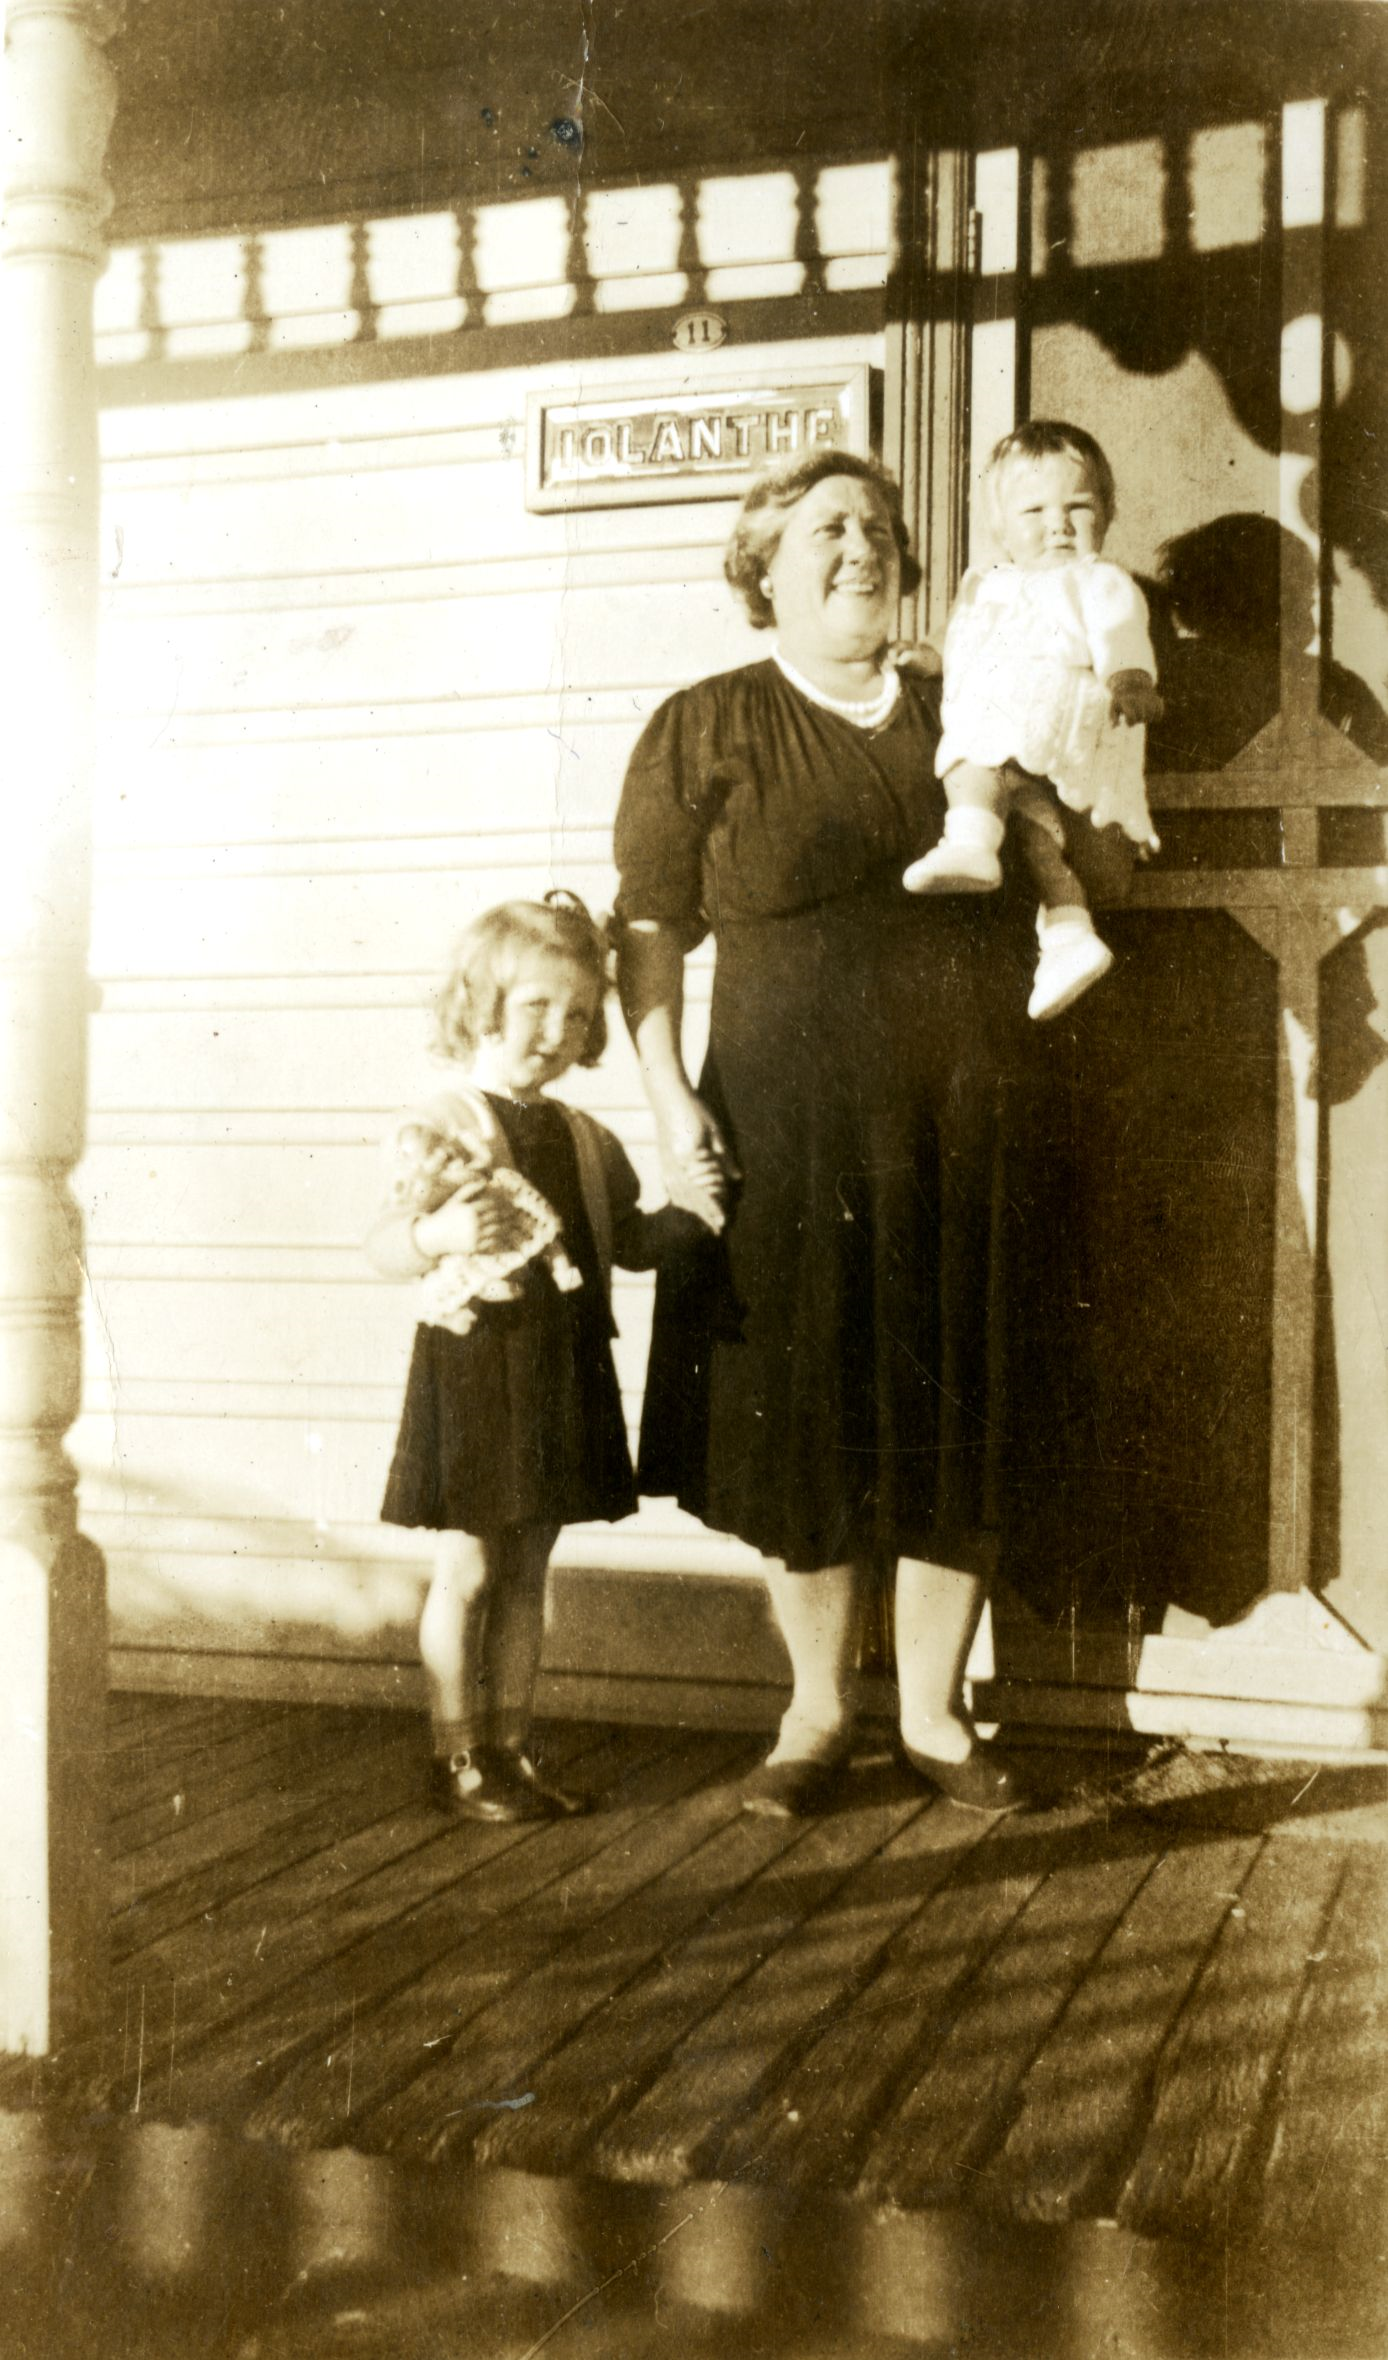 historical photo showing residents at front door of home